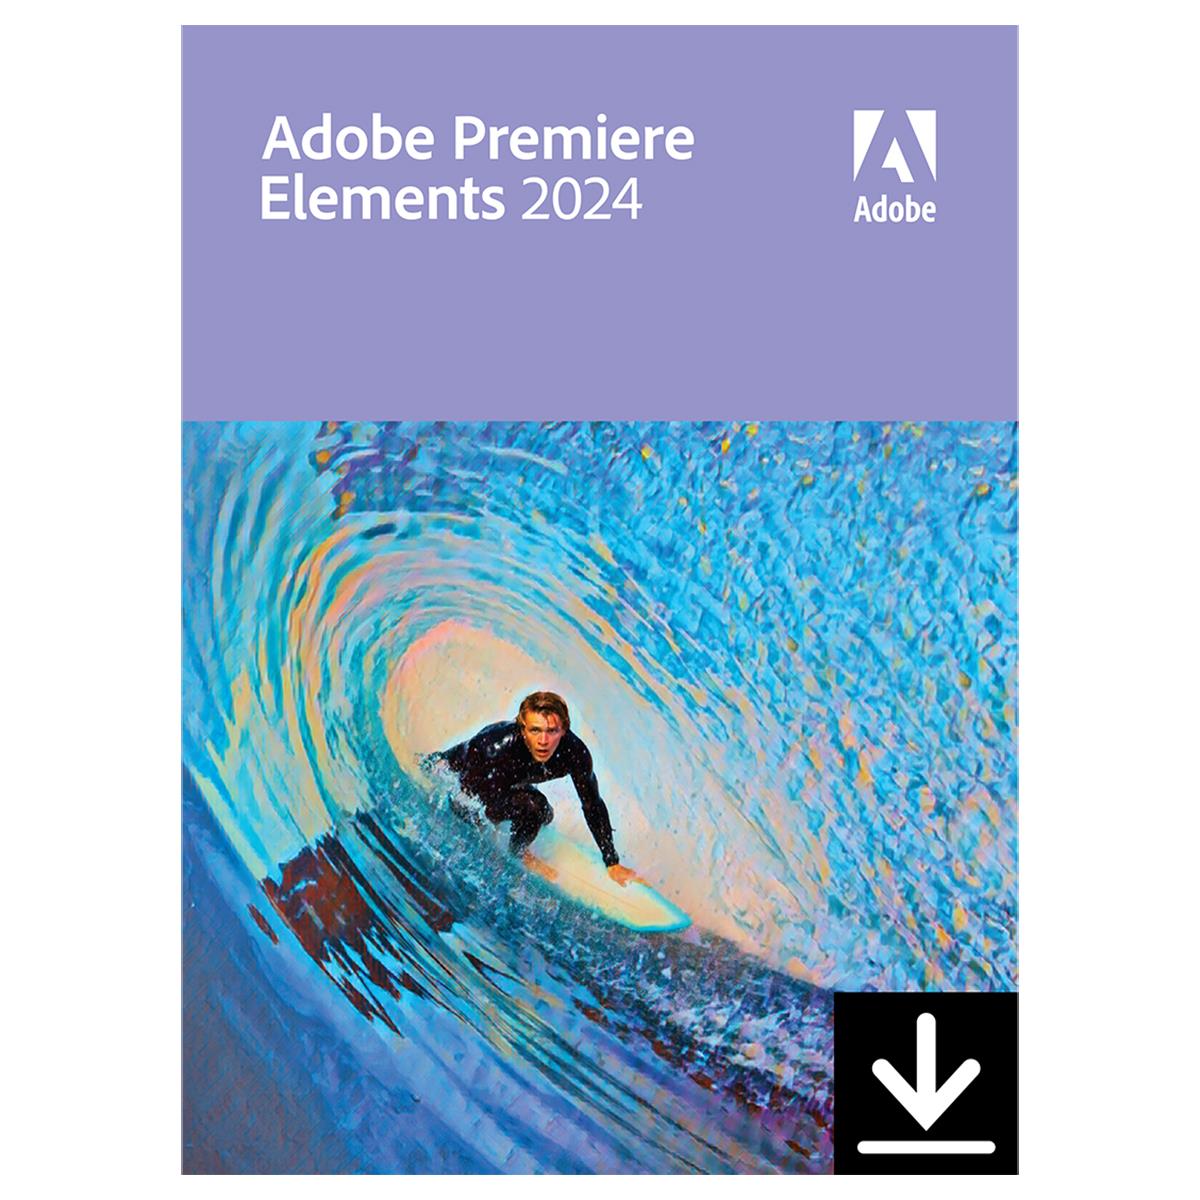 Image of Adobe Premiere Elements 2024 for Macintosh